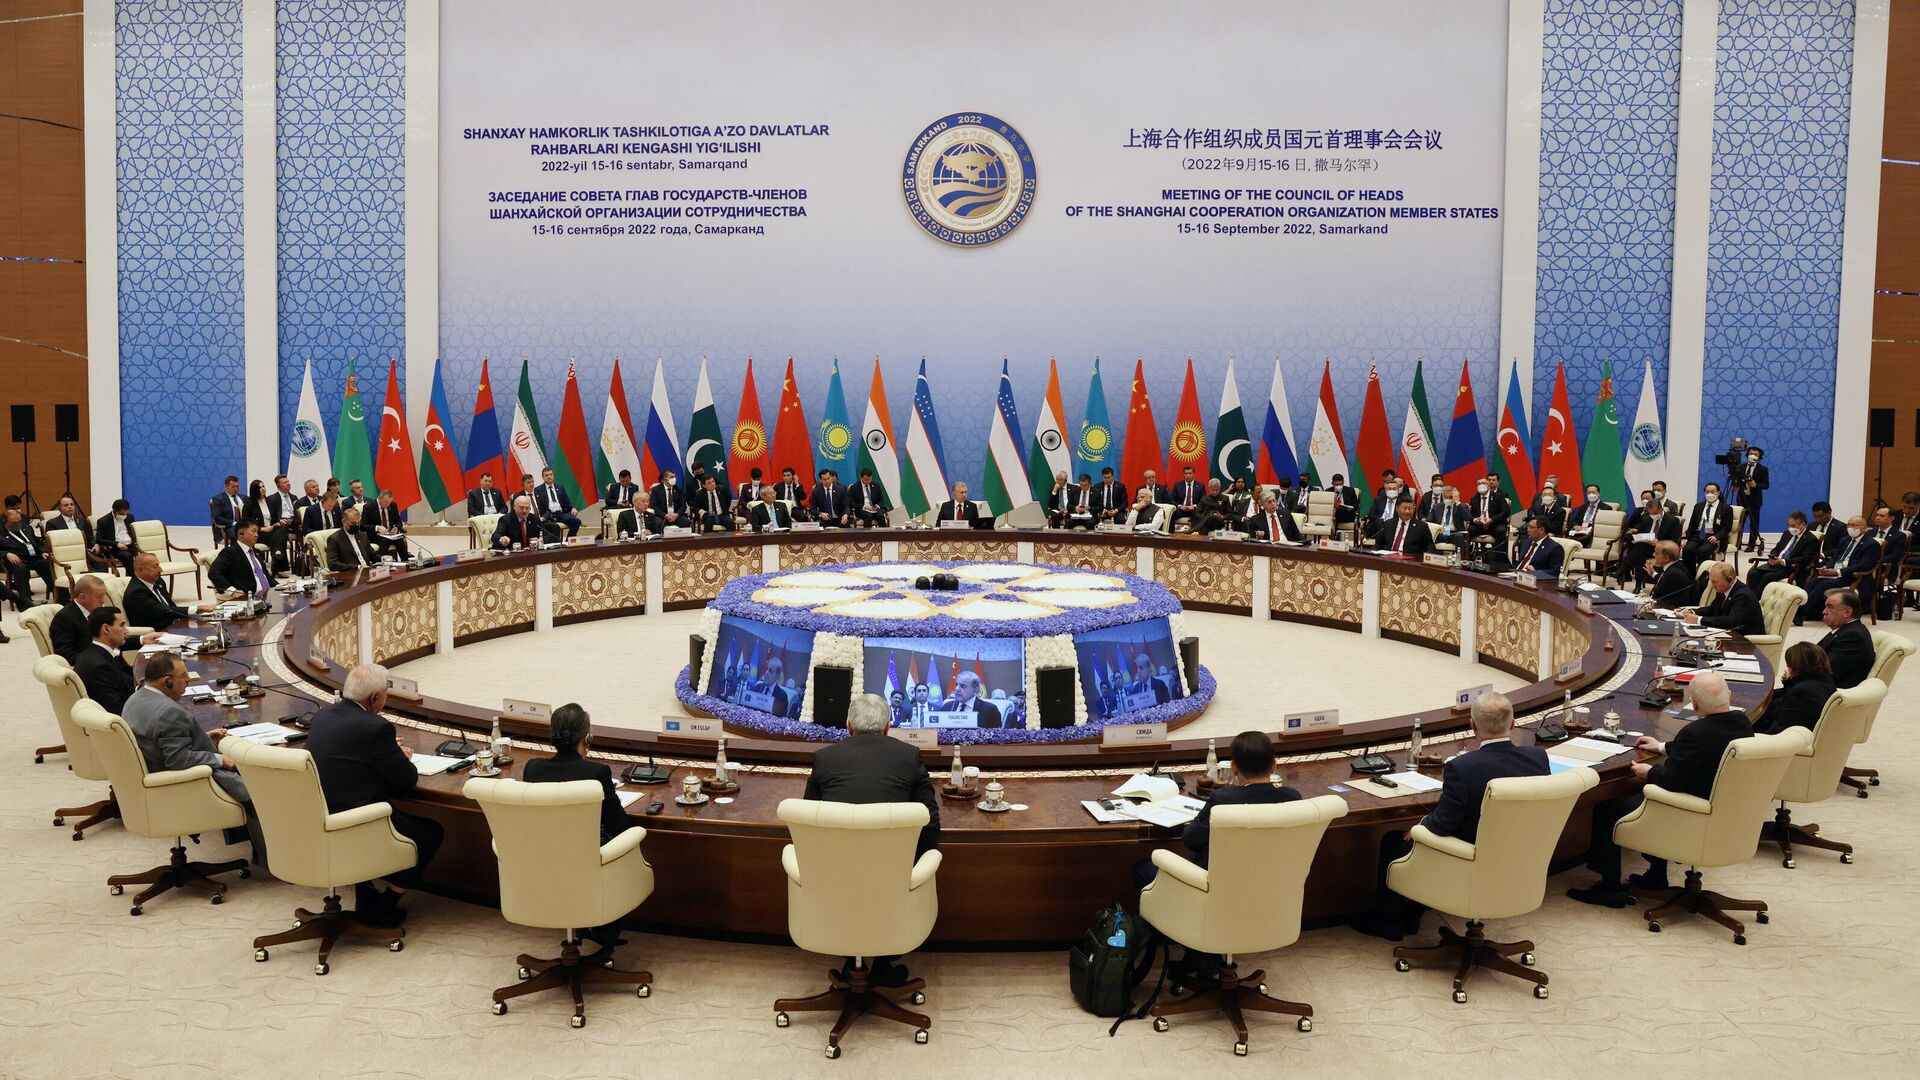 Annual Trade With SCO Rises 10% to $40.9b